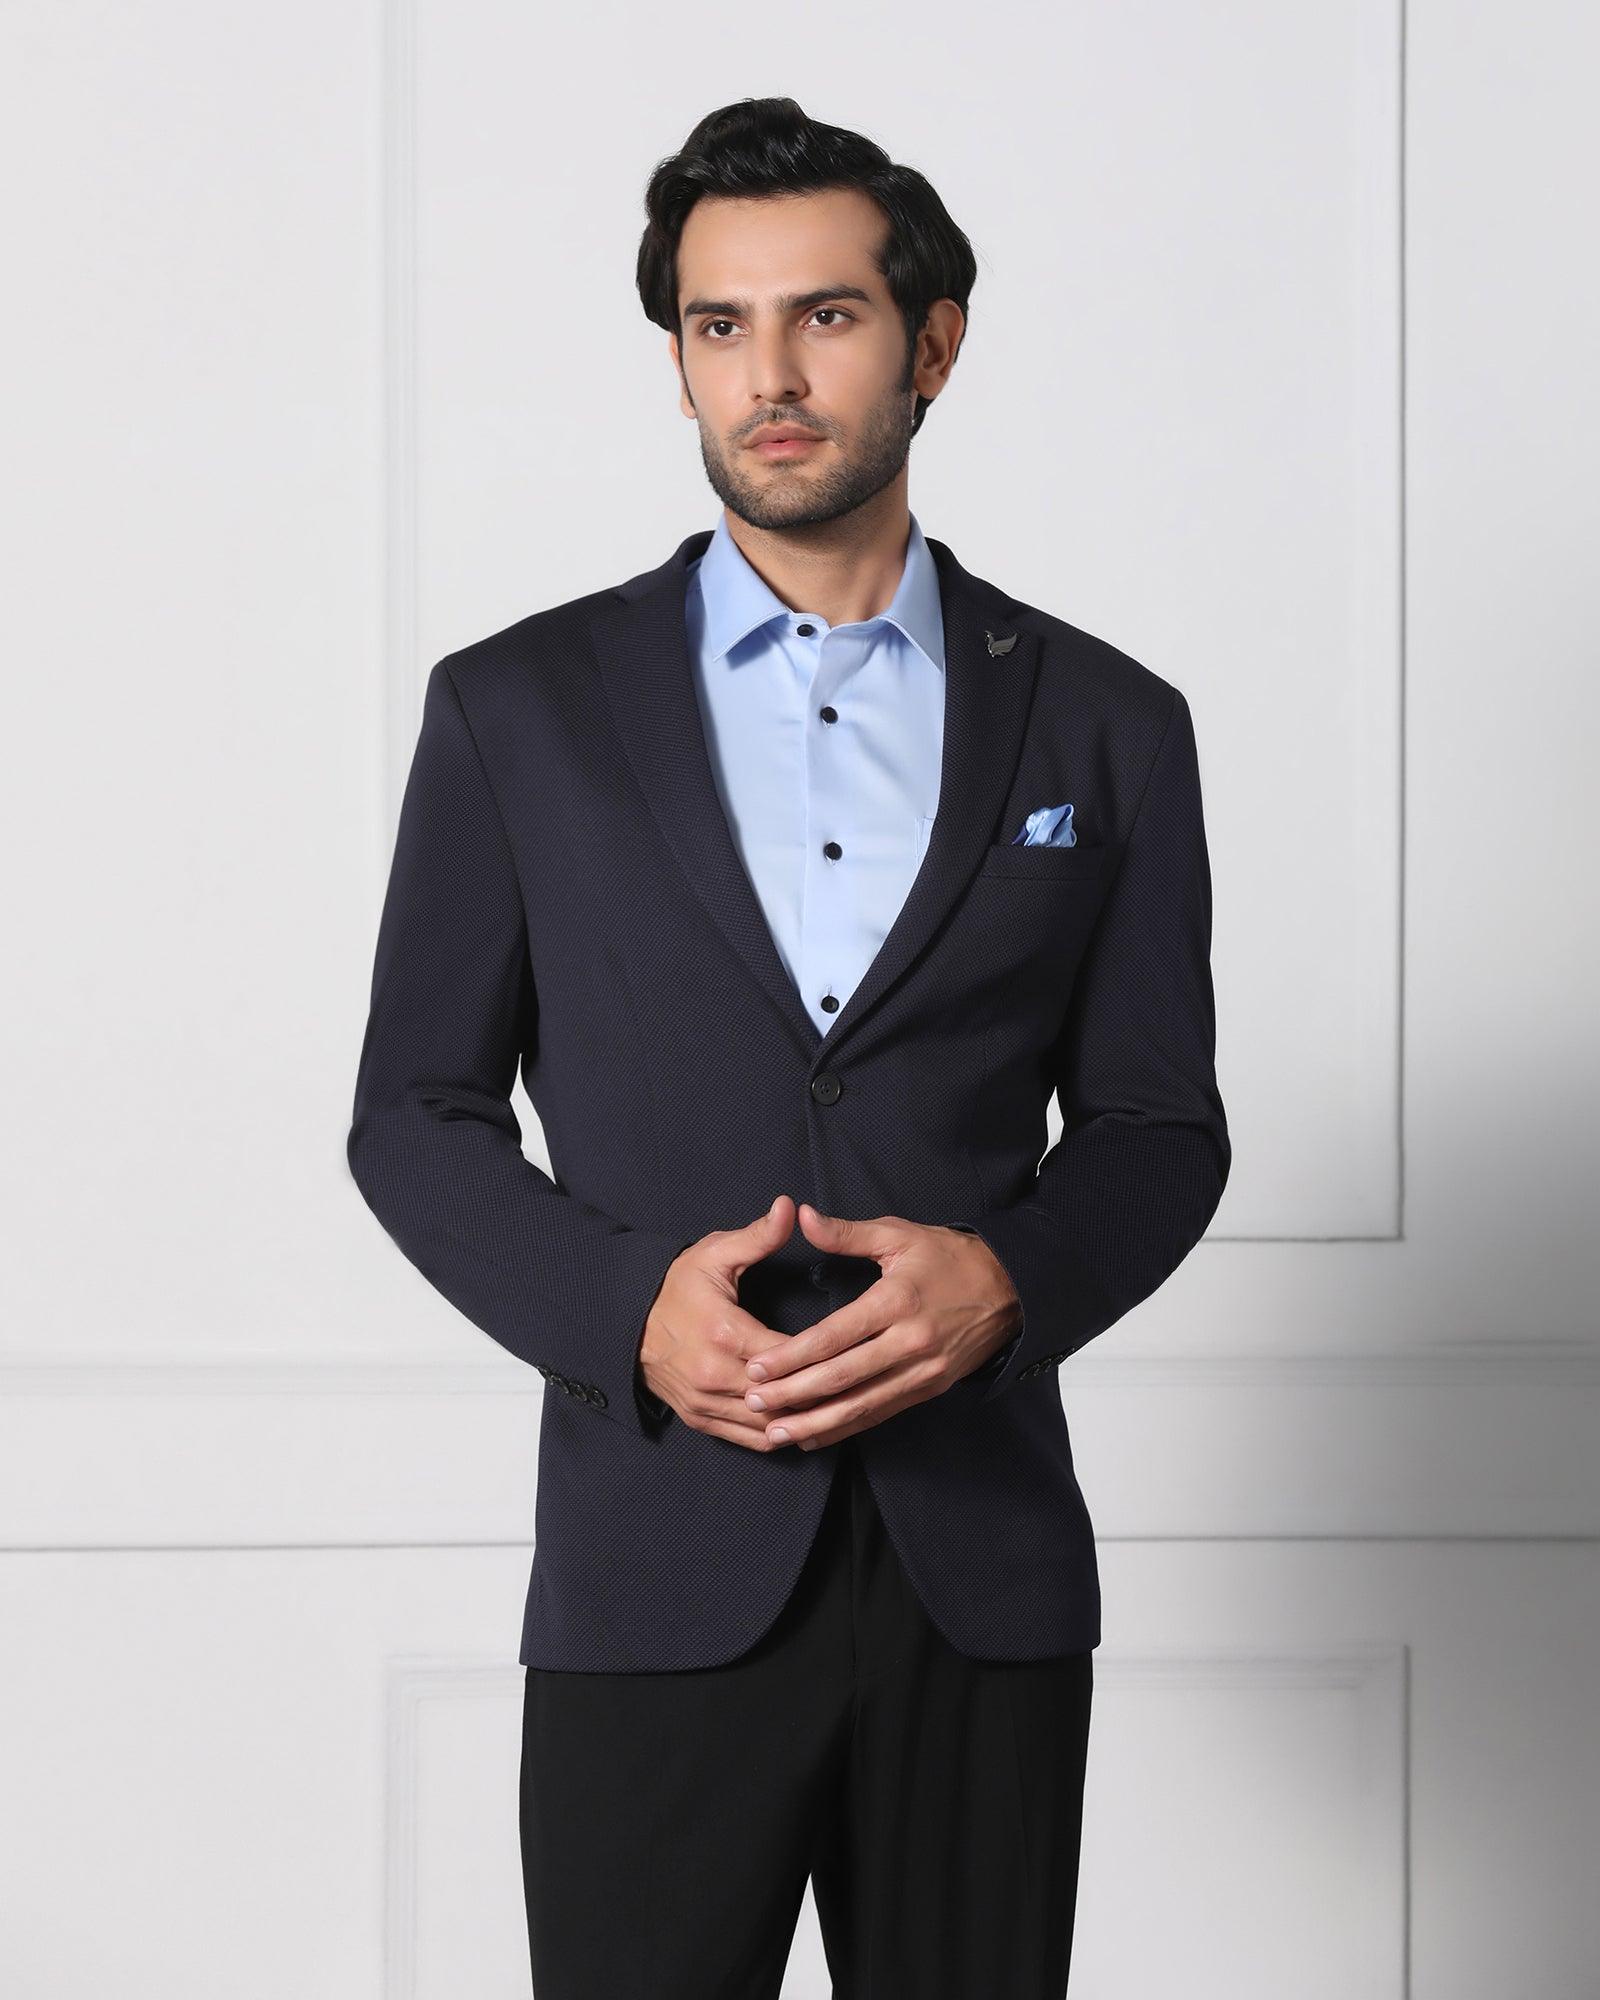 Semi-Formal Attire for Men | Guide to a Great Appearance - Nimble Made